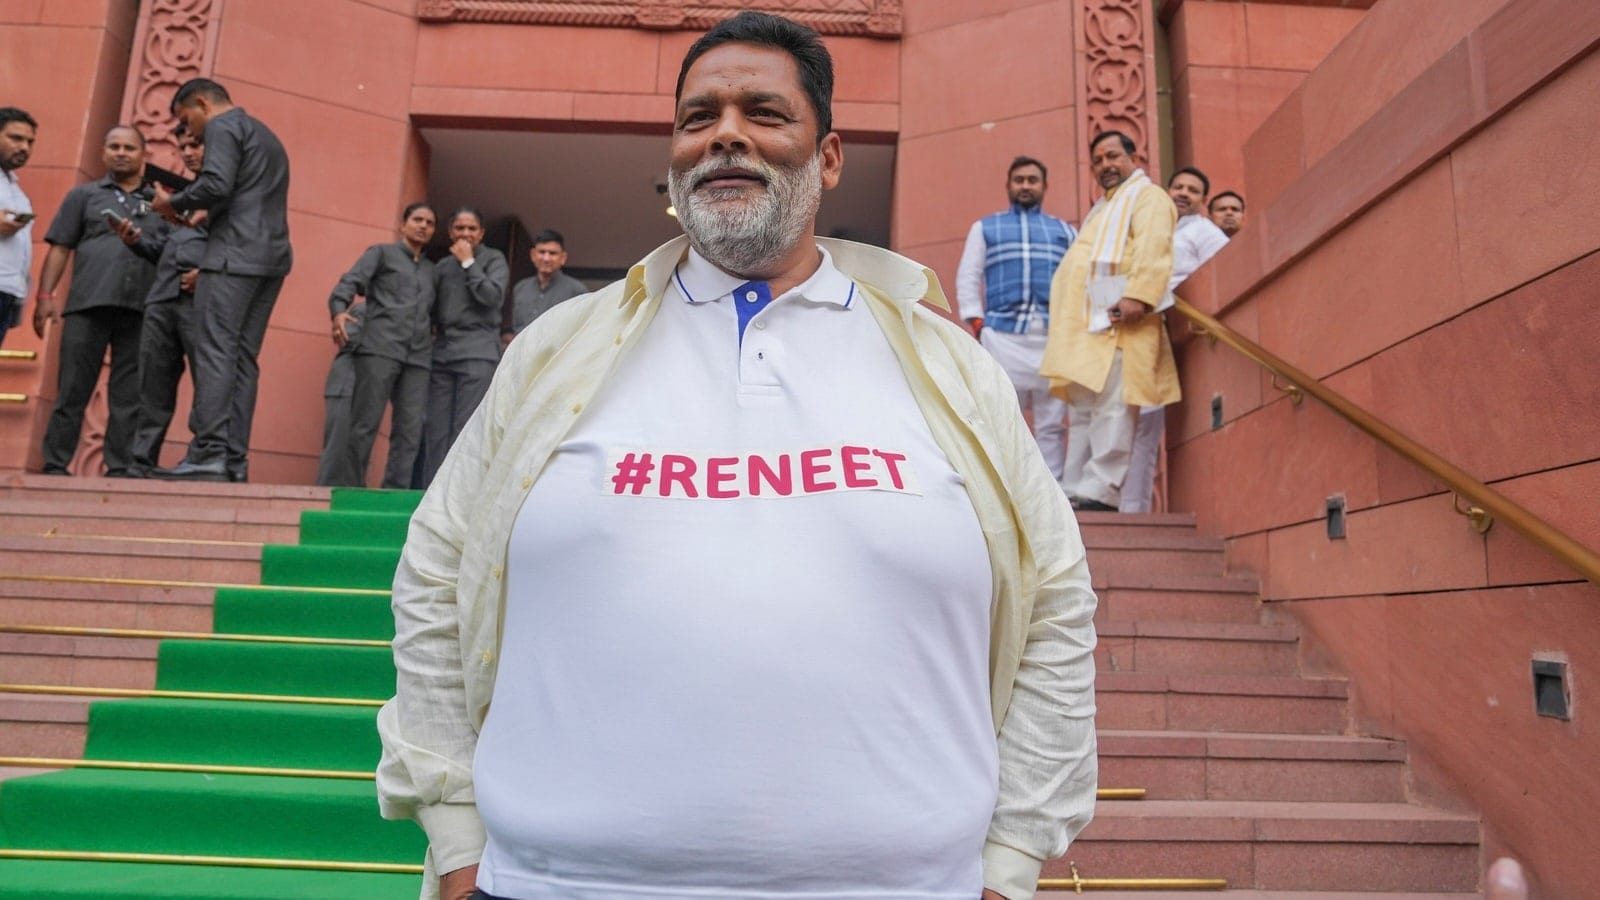 Bihar MP Pappu Yadav sports ‘re-NEET’ T-shirt while taking oath in Lok Sabha, asks ‘who will talk about the youth?’